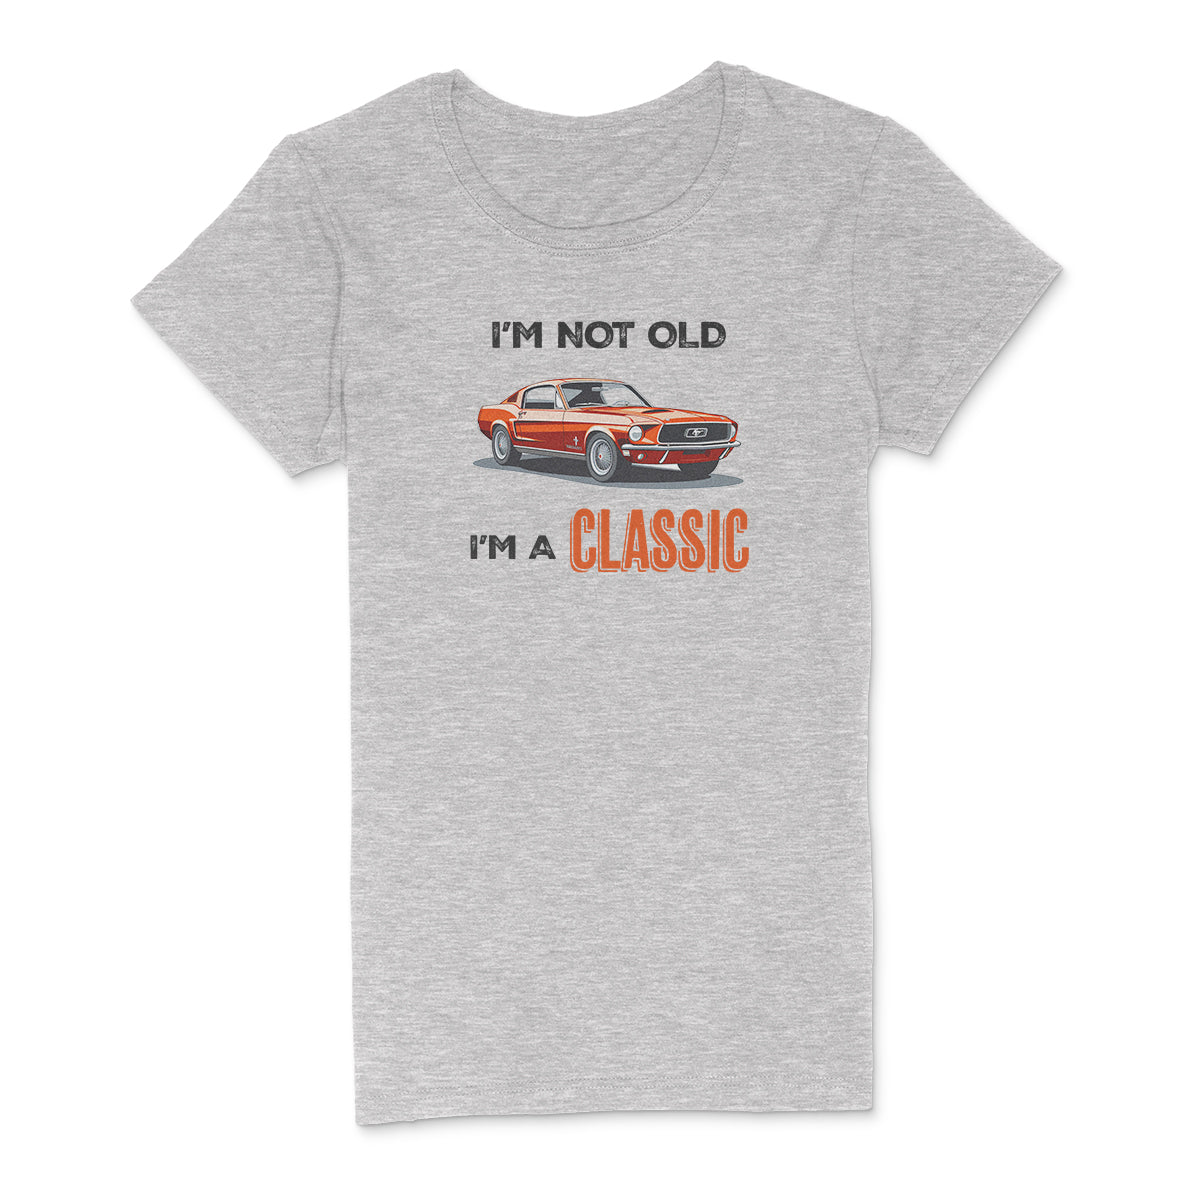 "I'm Not Old, I'm a Classic" Premium Midweight Ringspun Cotton T-Shirt - Mens/Womens Fits